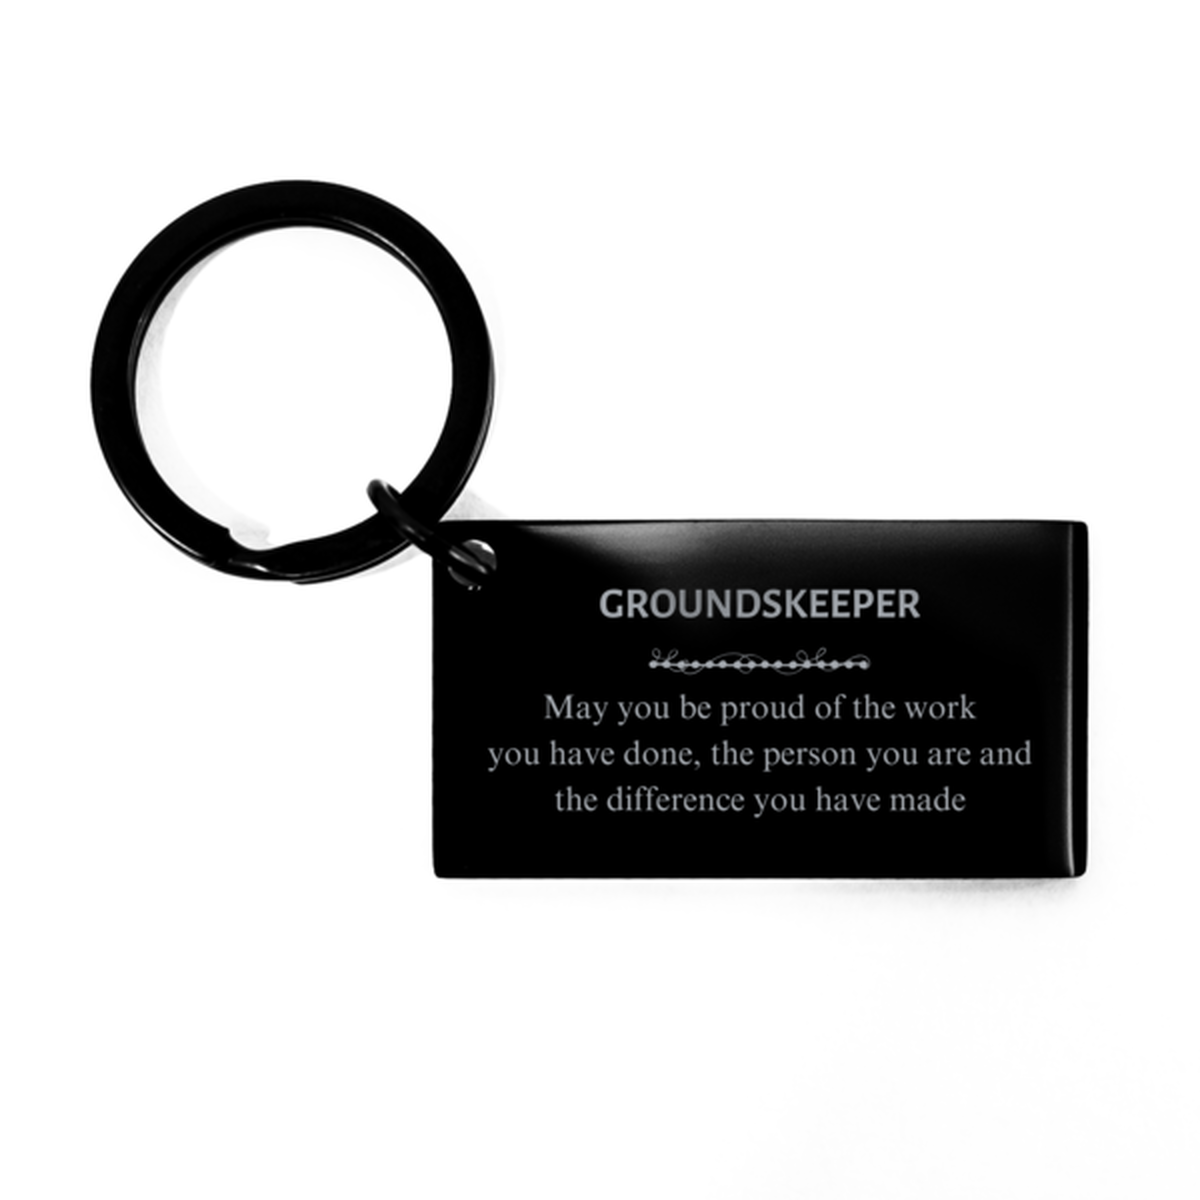 Marketing Manager May you be proud of the work you have done, Retirement Groundskeeper Keychain for Colleague Appreciation Gifts Amazing for Groundskeeper